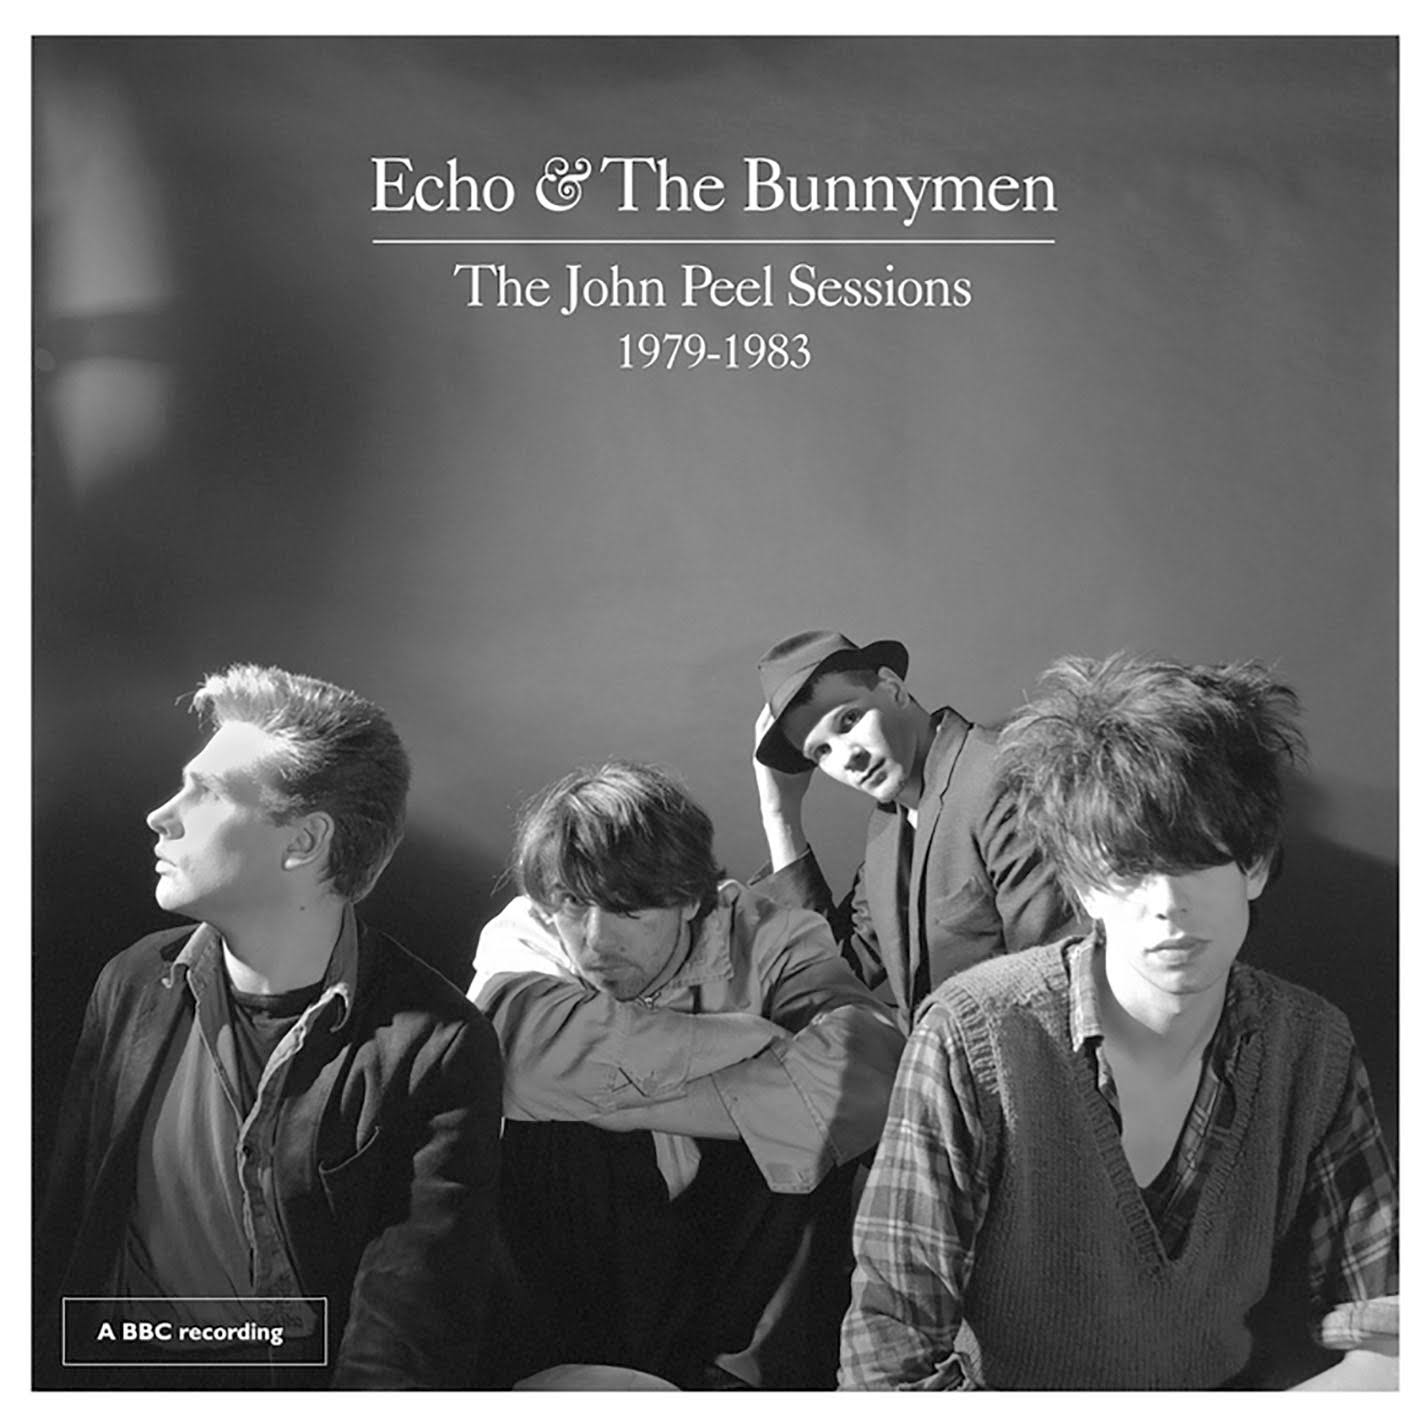 The John Peel Sessions 1979-1983 - Echo and The Bunnymen